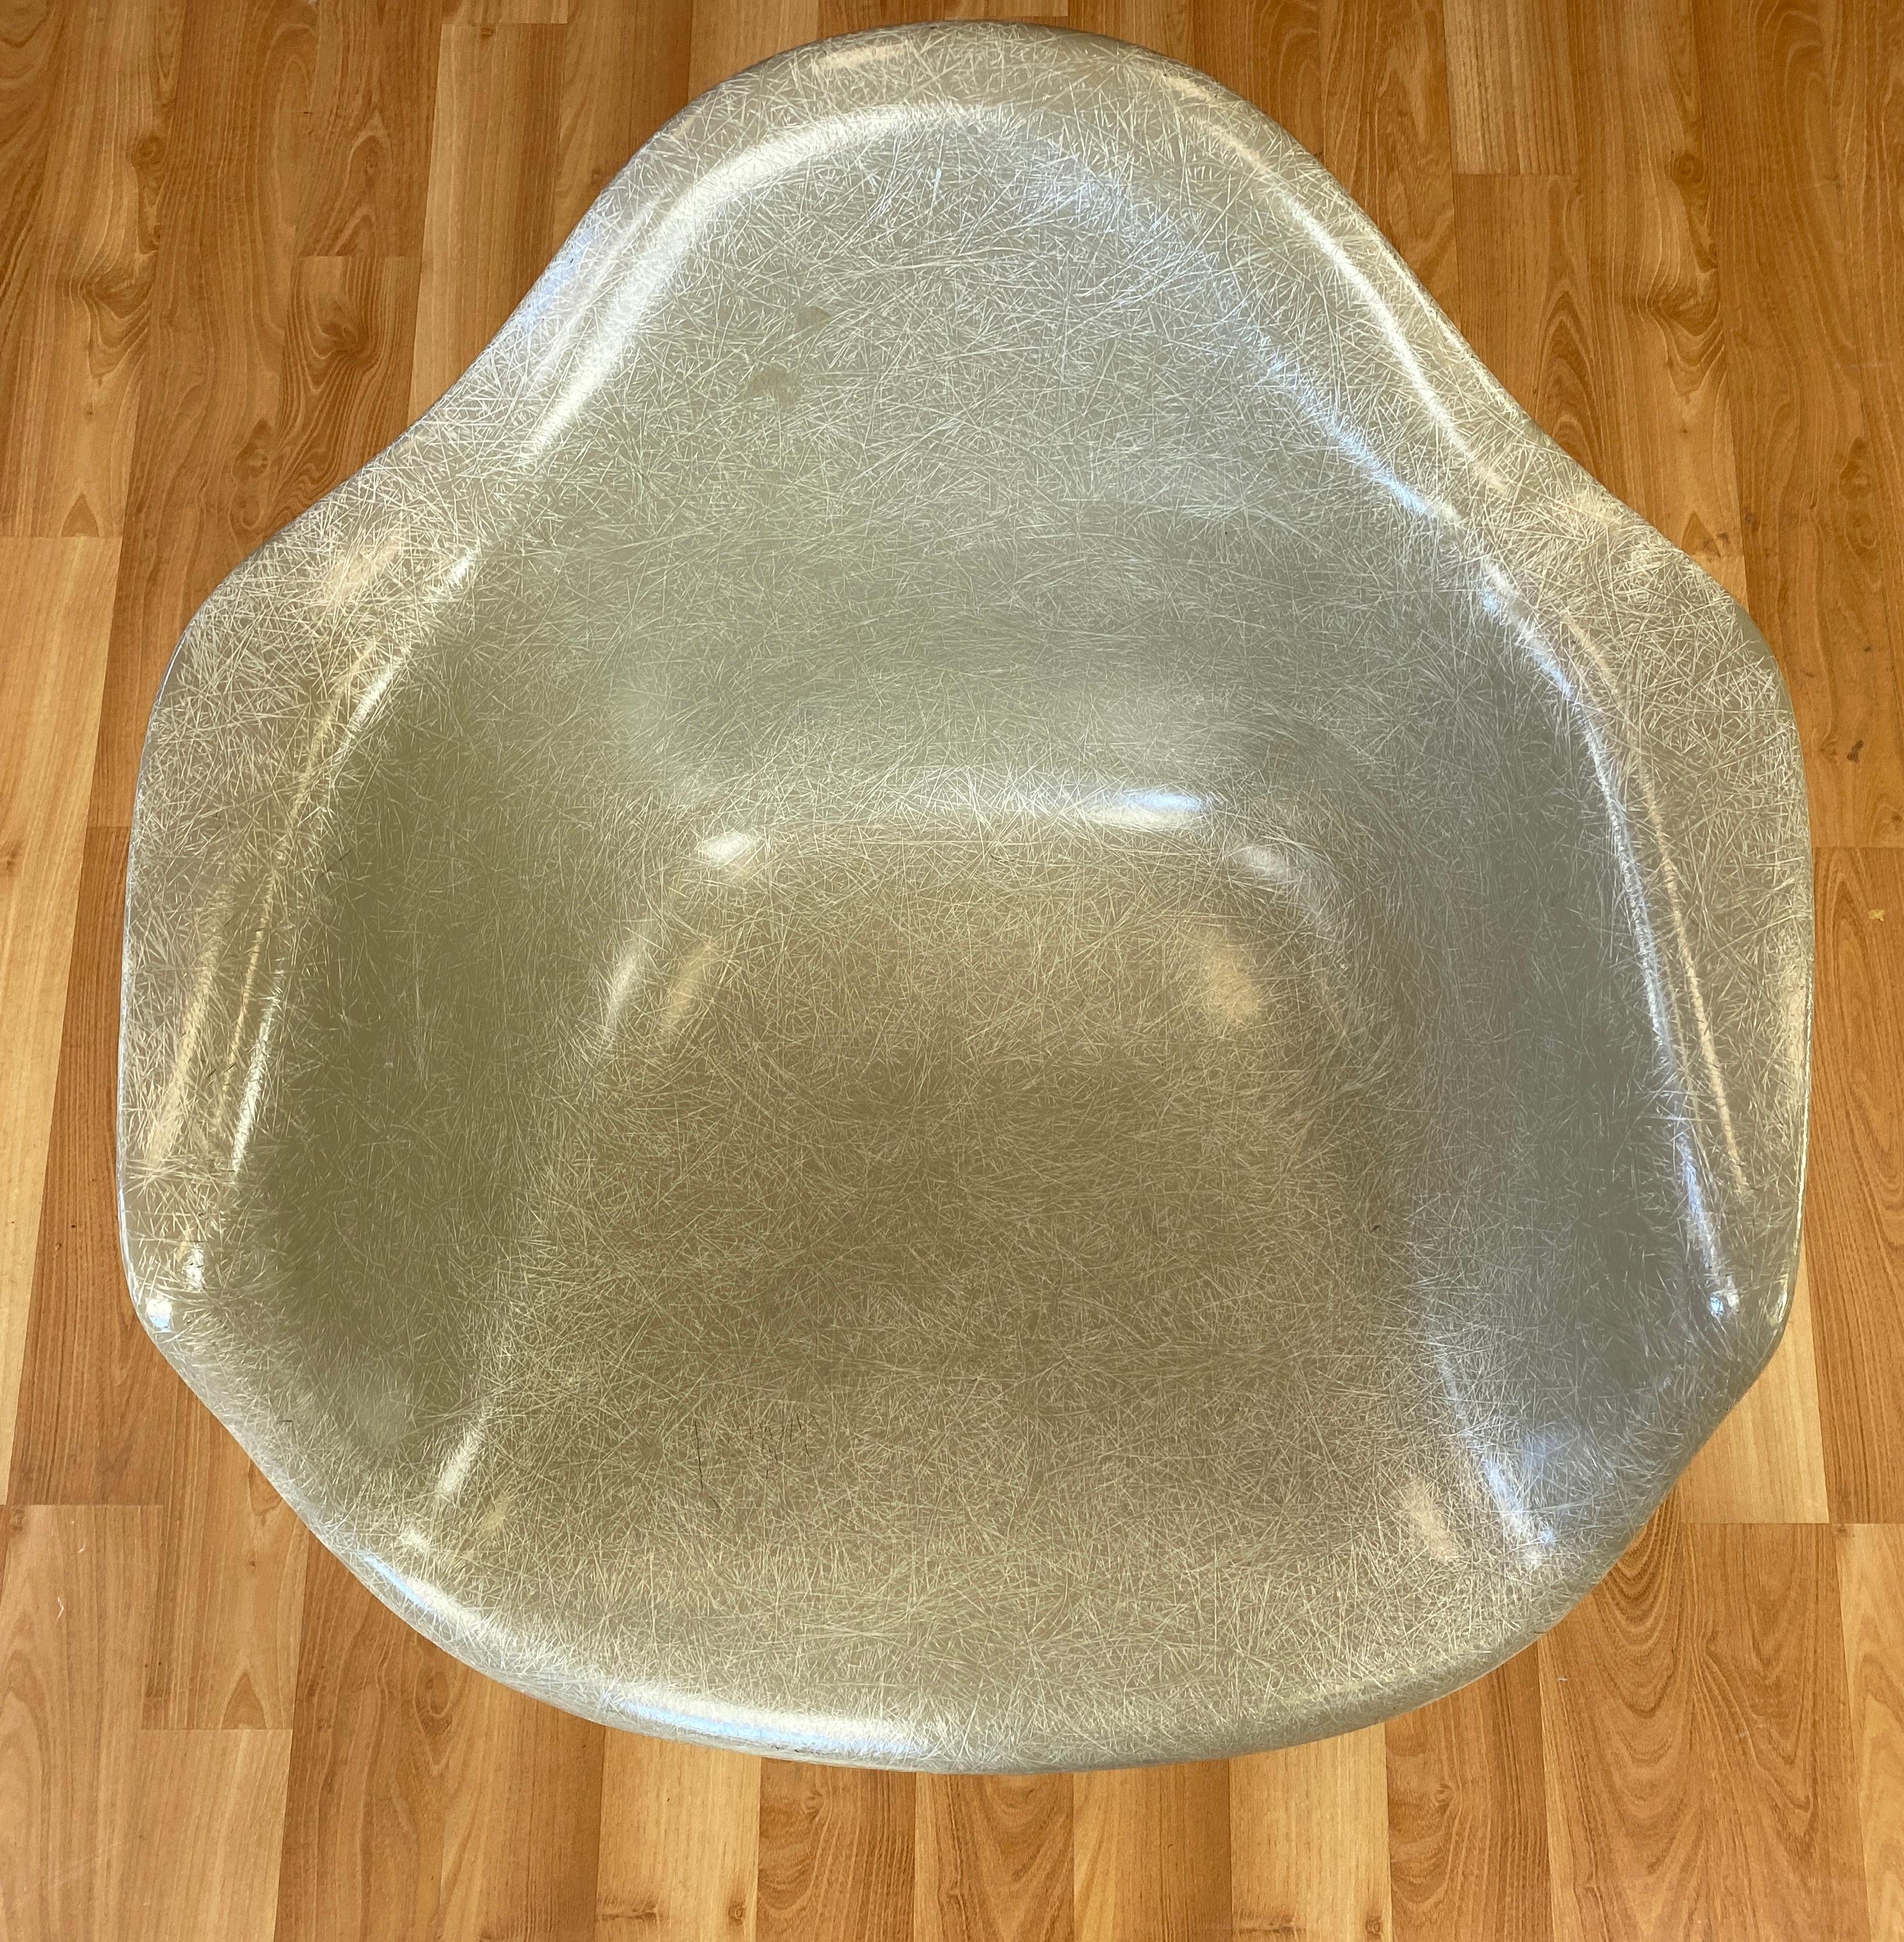 Early Production Charles Eames Fiberglass Shell Armchair for Herman Miller 2